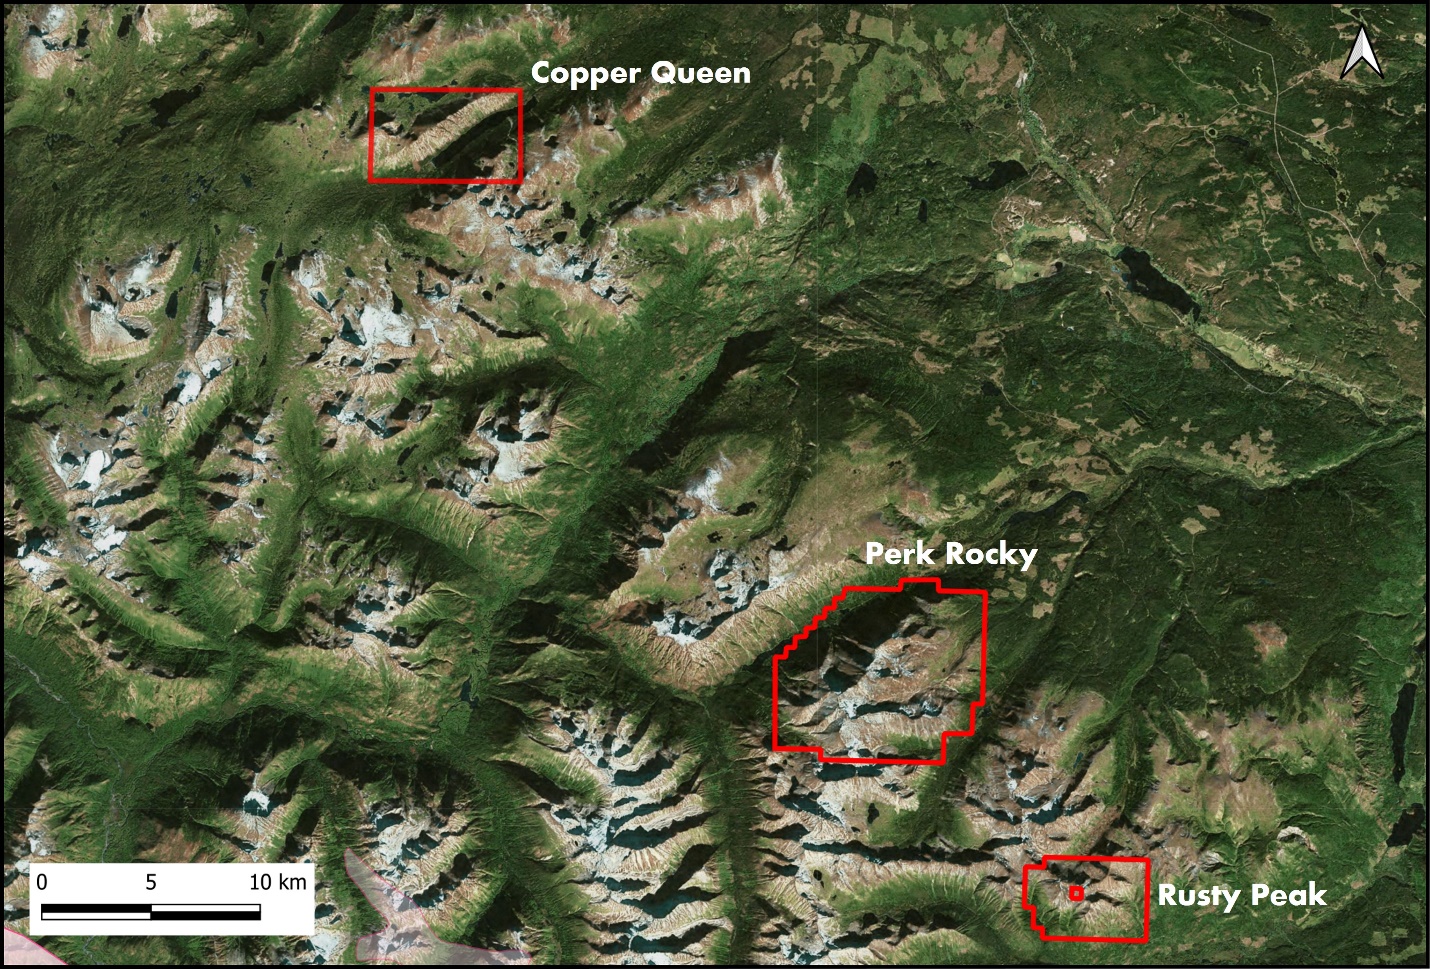 Location of new properties (Copper Queen and Rusty Peak)  with respect to the recently optioned Perk Rocky Project.